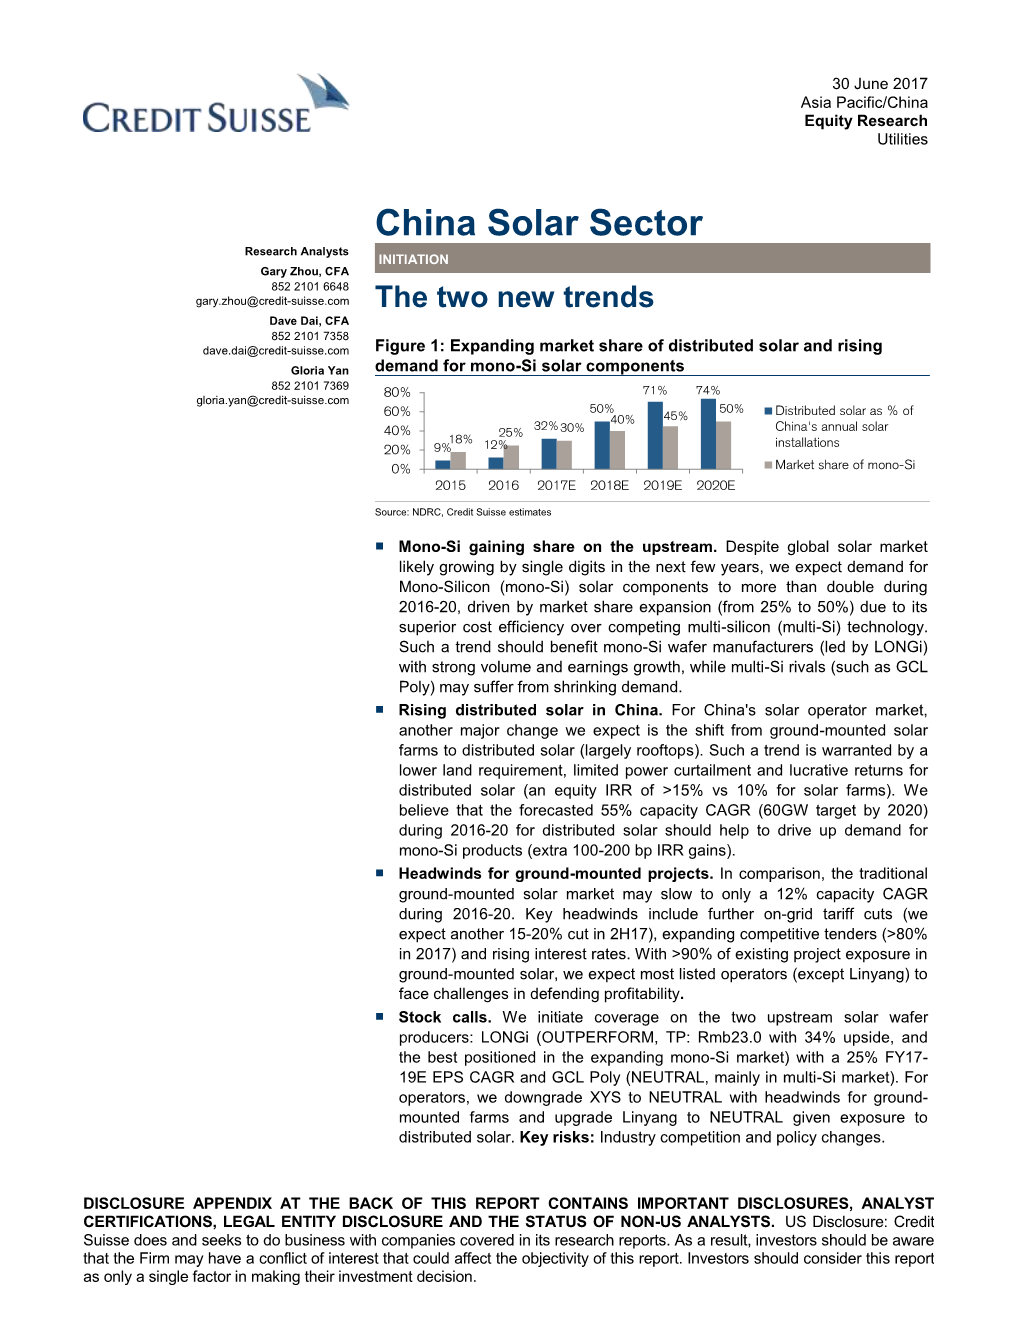 China Solar Sector Research Analysts INITIATION Gary Zhou, CFA 852 2101 6648 Gary.Zhou@Credit-Suisse.Com the Two New Trends